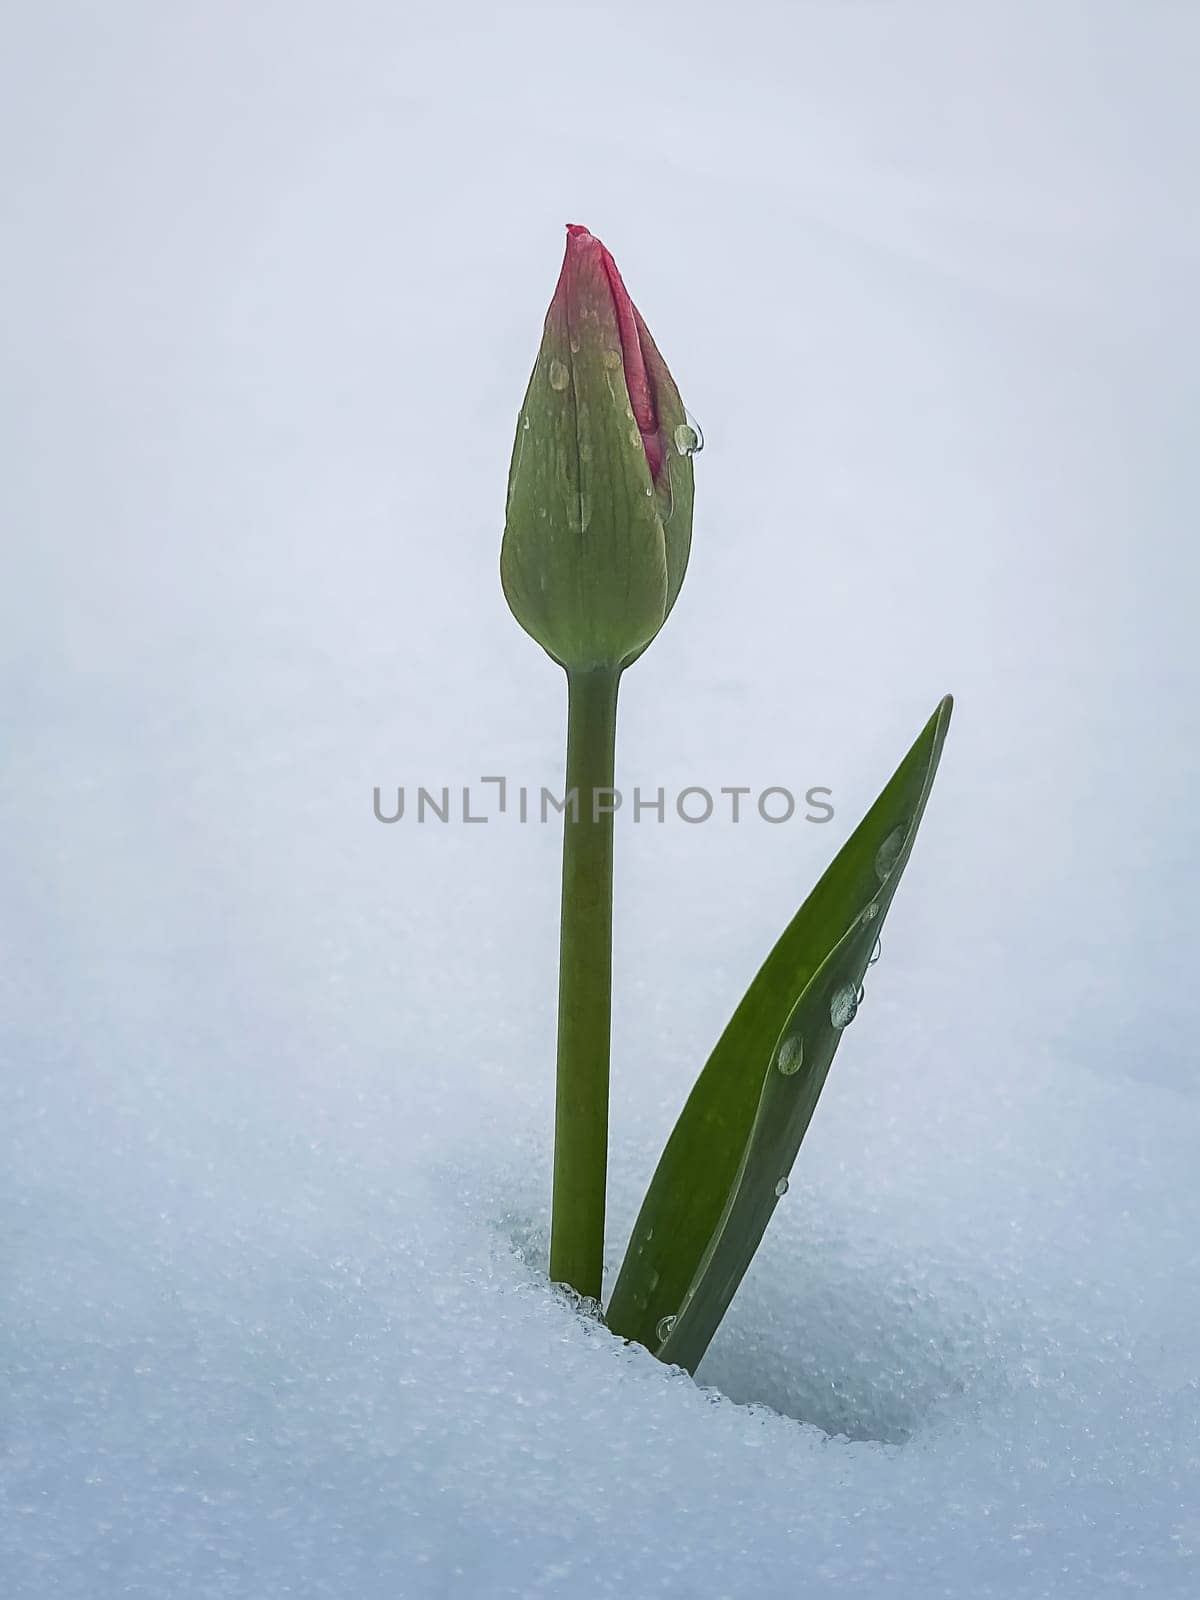 Unbloomed young tulip flower growing under the white snow. Water drops on the bud and leaves